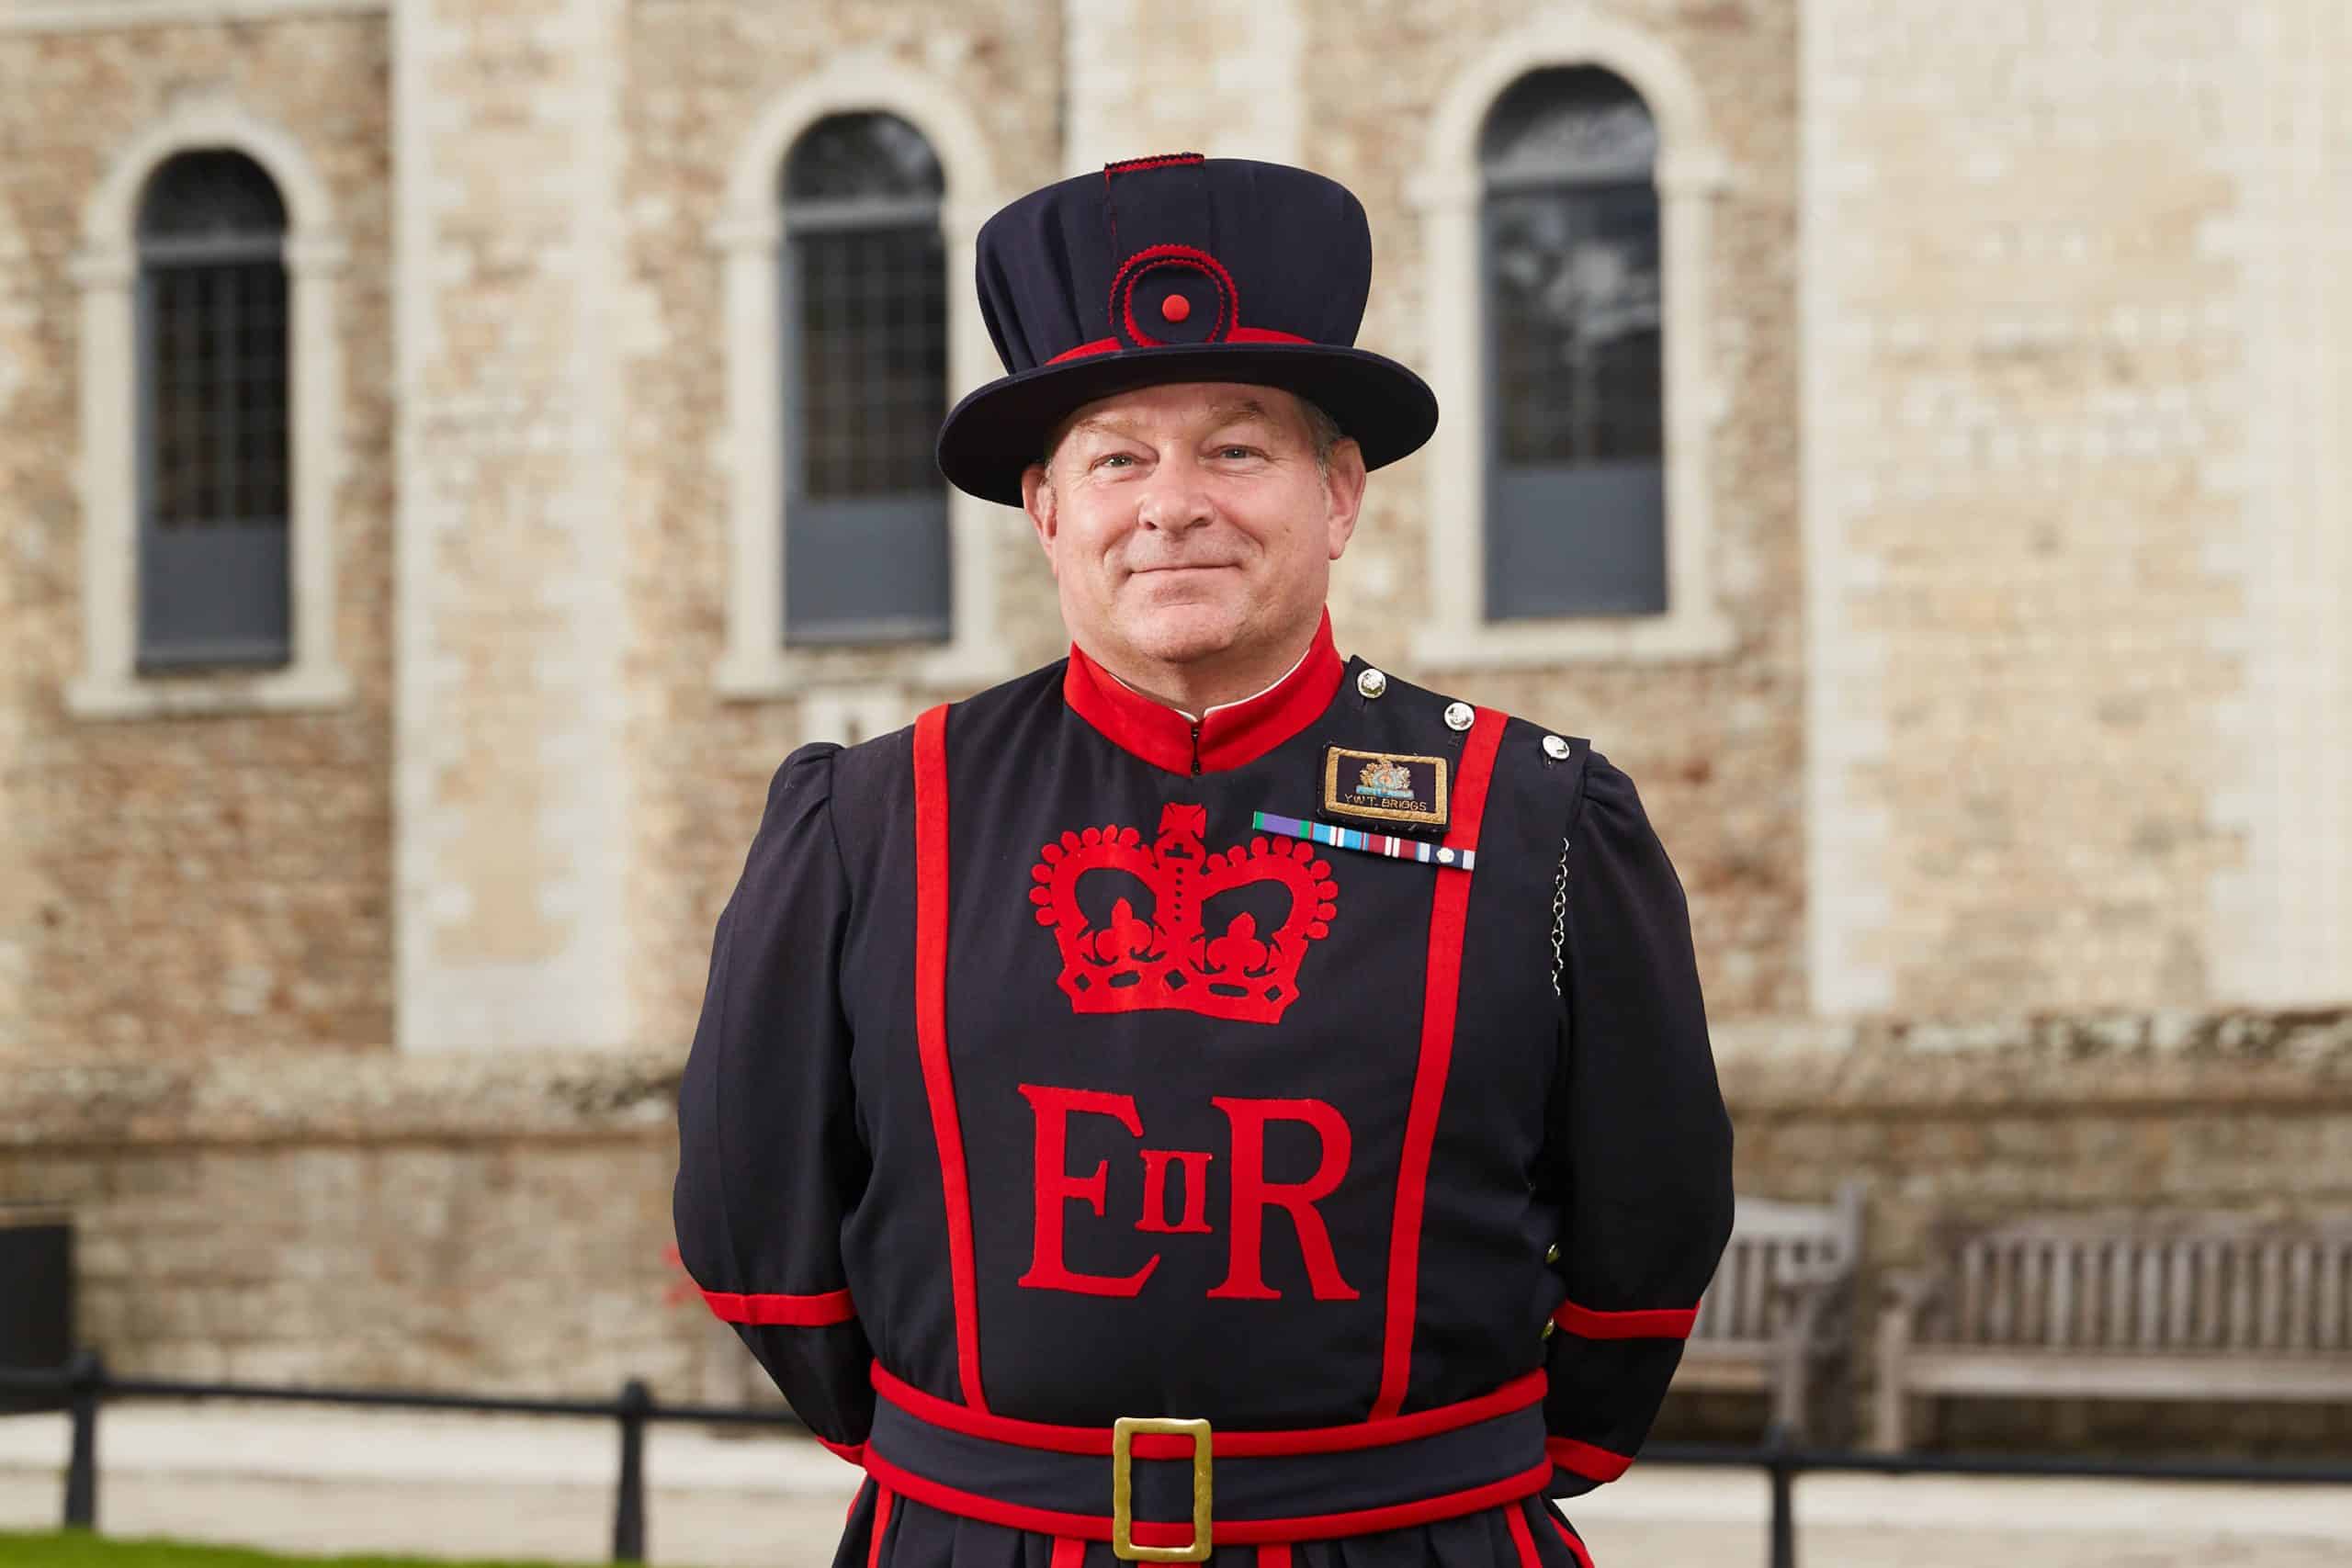 Inside The Tower Of London Returns for its 6th Series on 2nd November 2023.